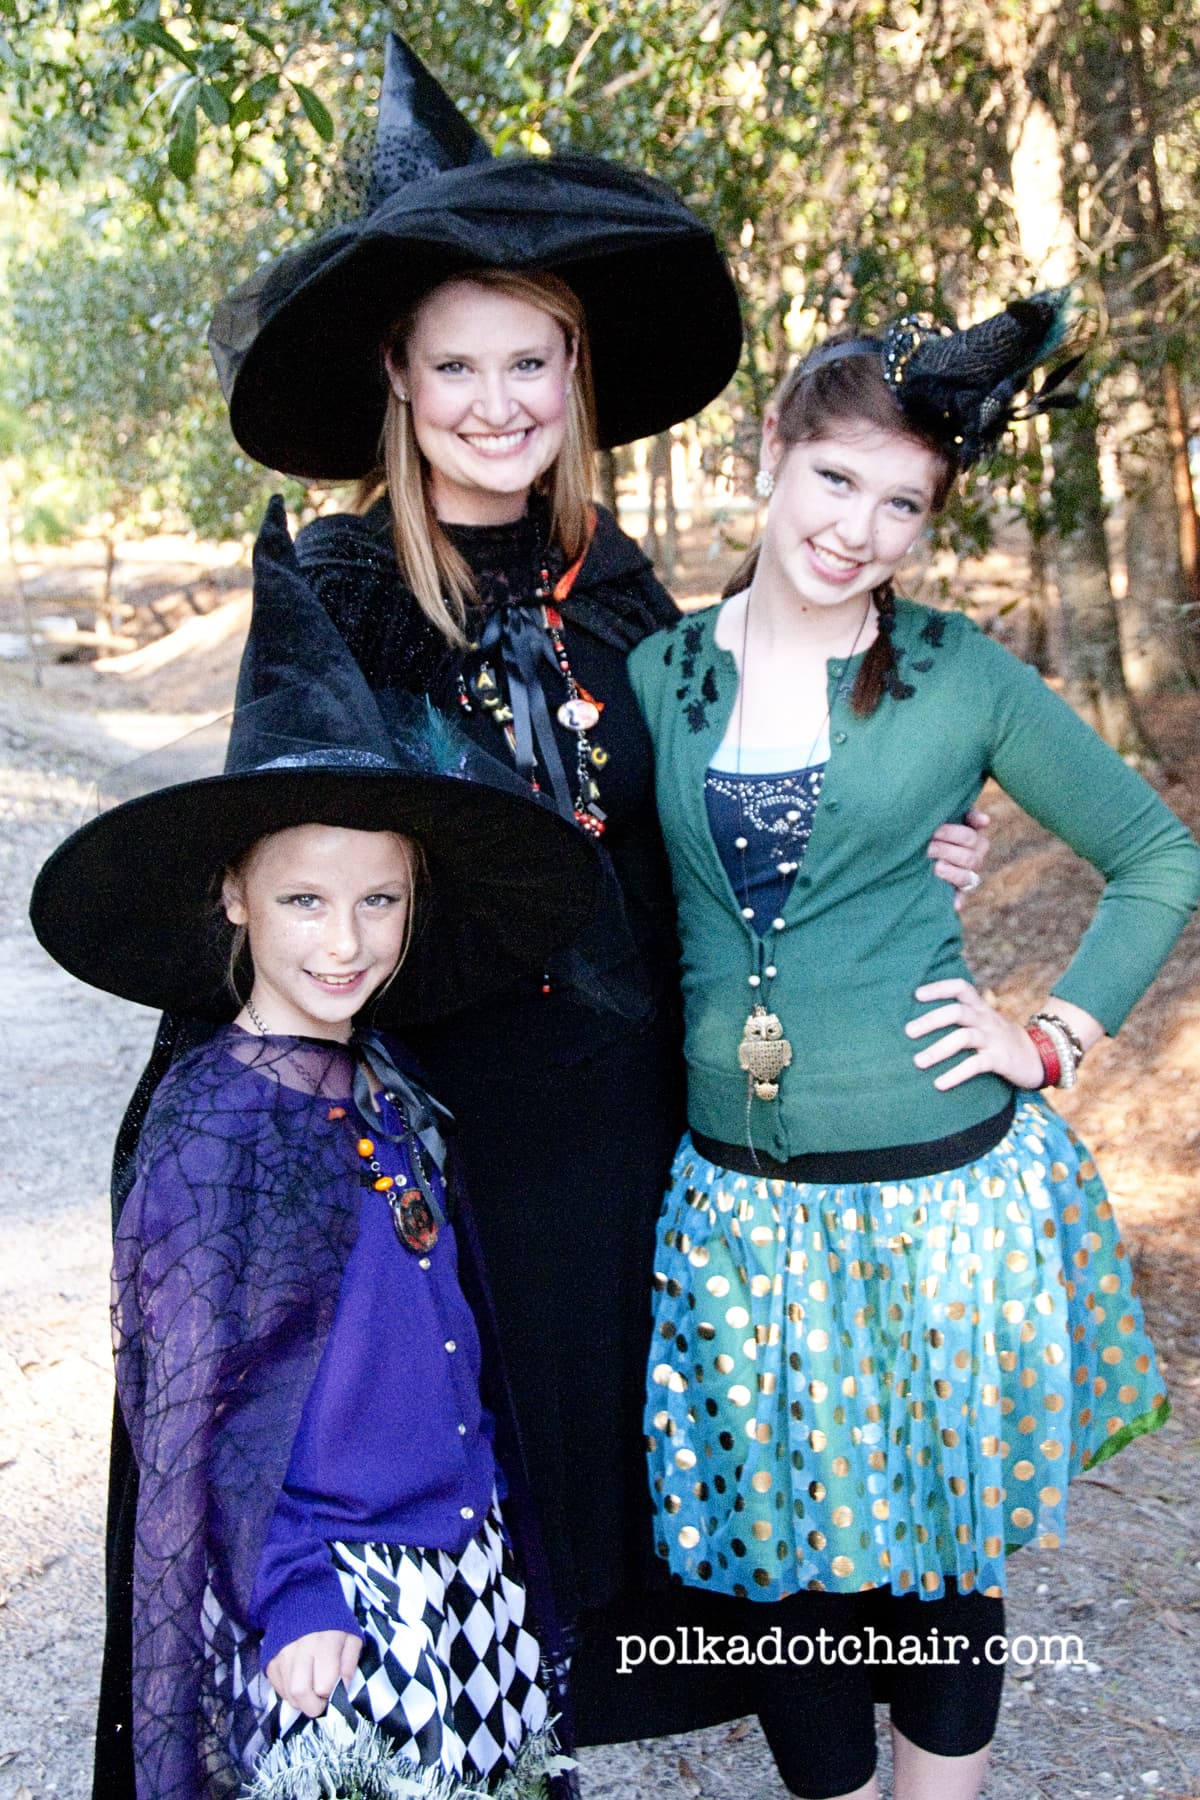 How to make a Fascinator for Halloween using a Witch hat. A cute accessory for a Halloween costume or party. 